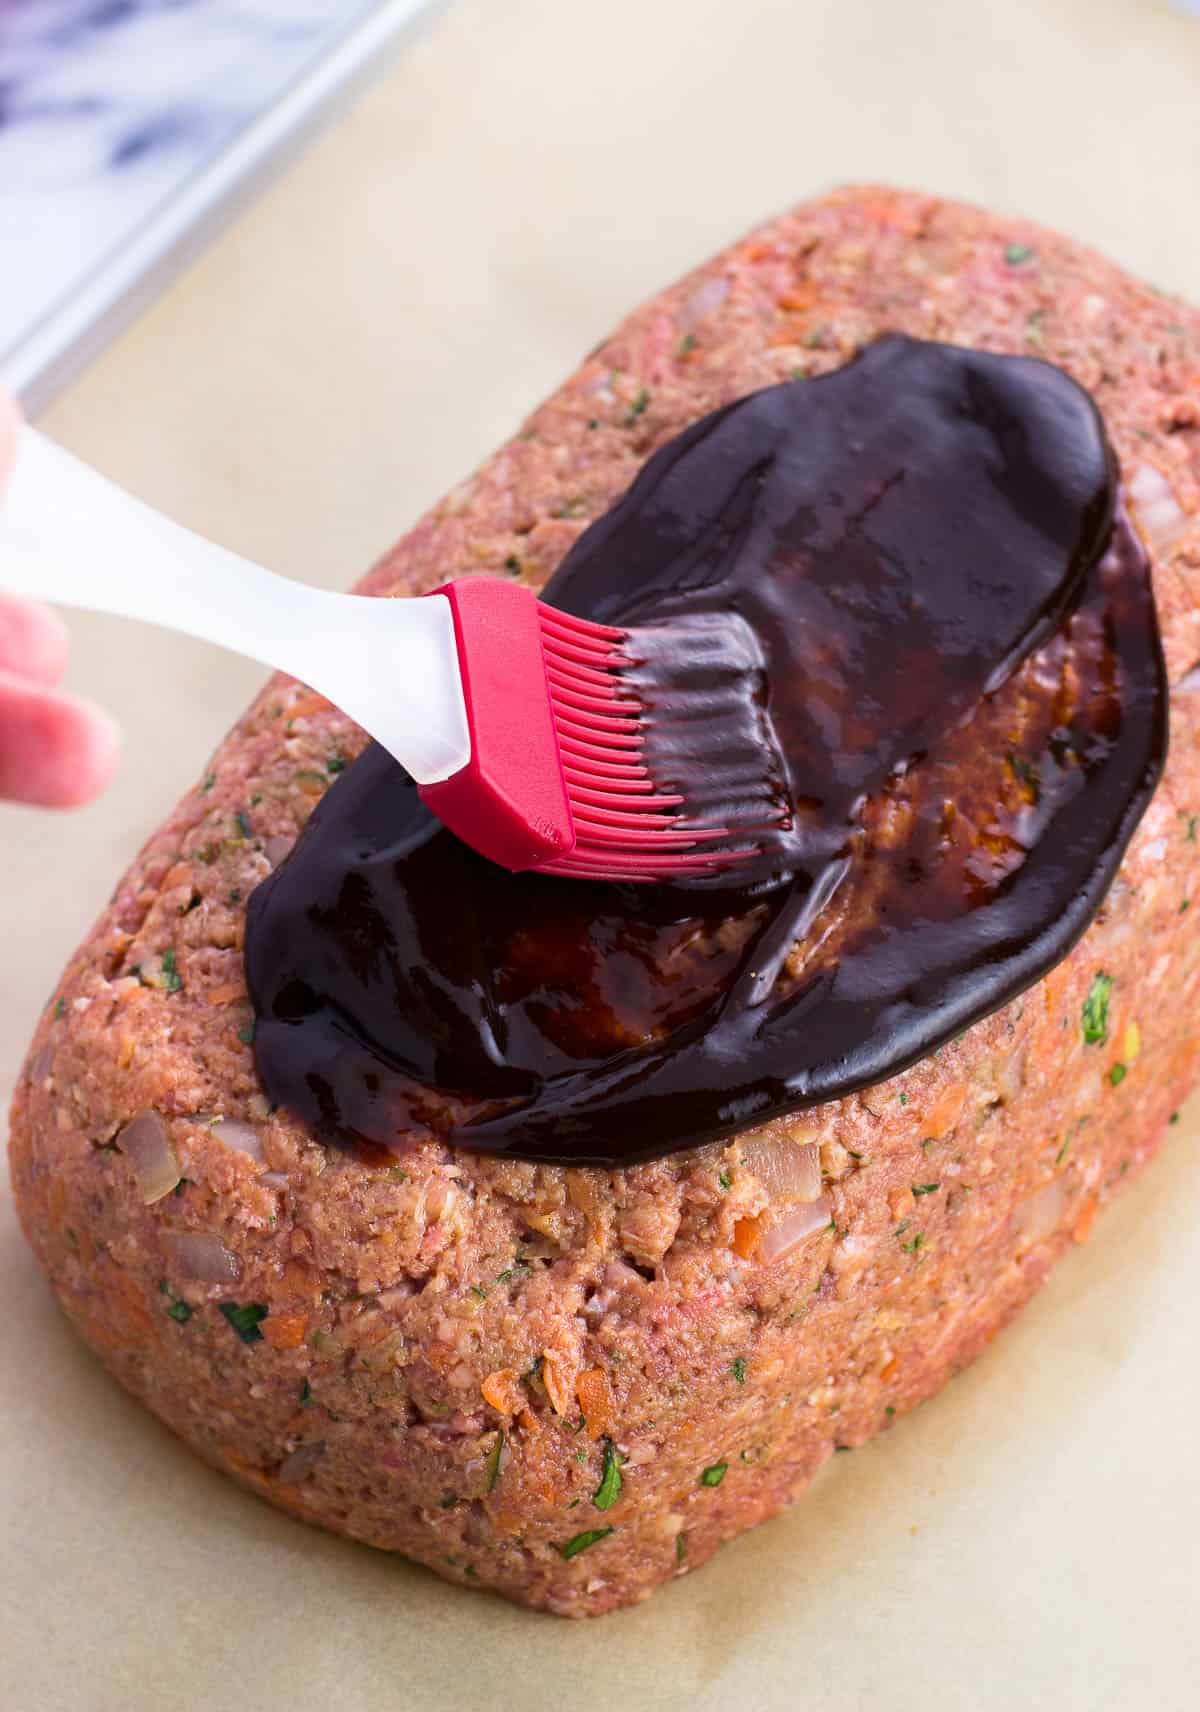 Balsamic ketchup being brushed onto a shaped meatloaf.